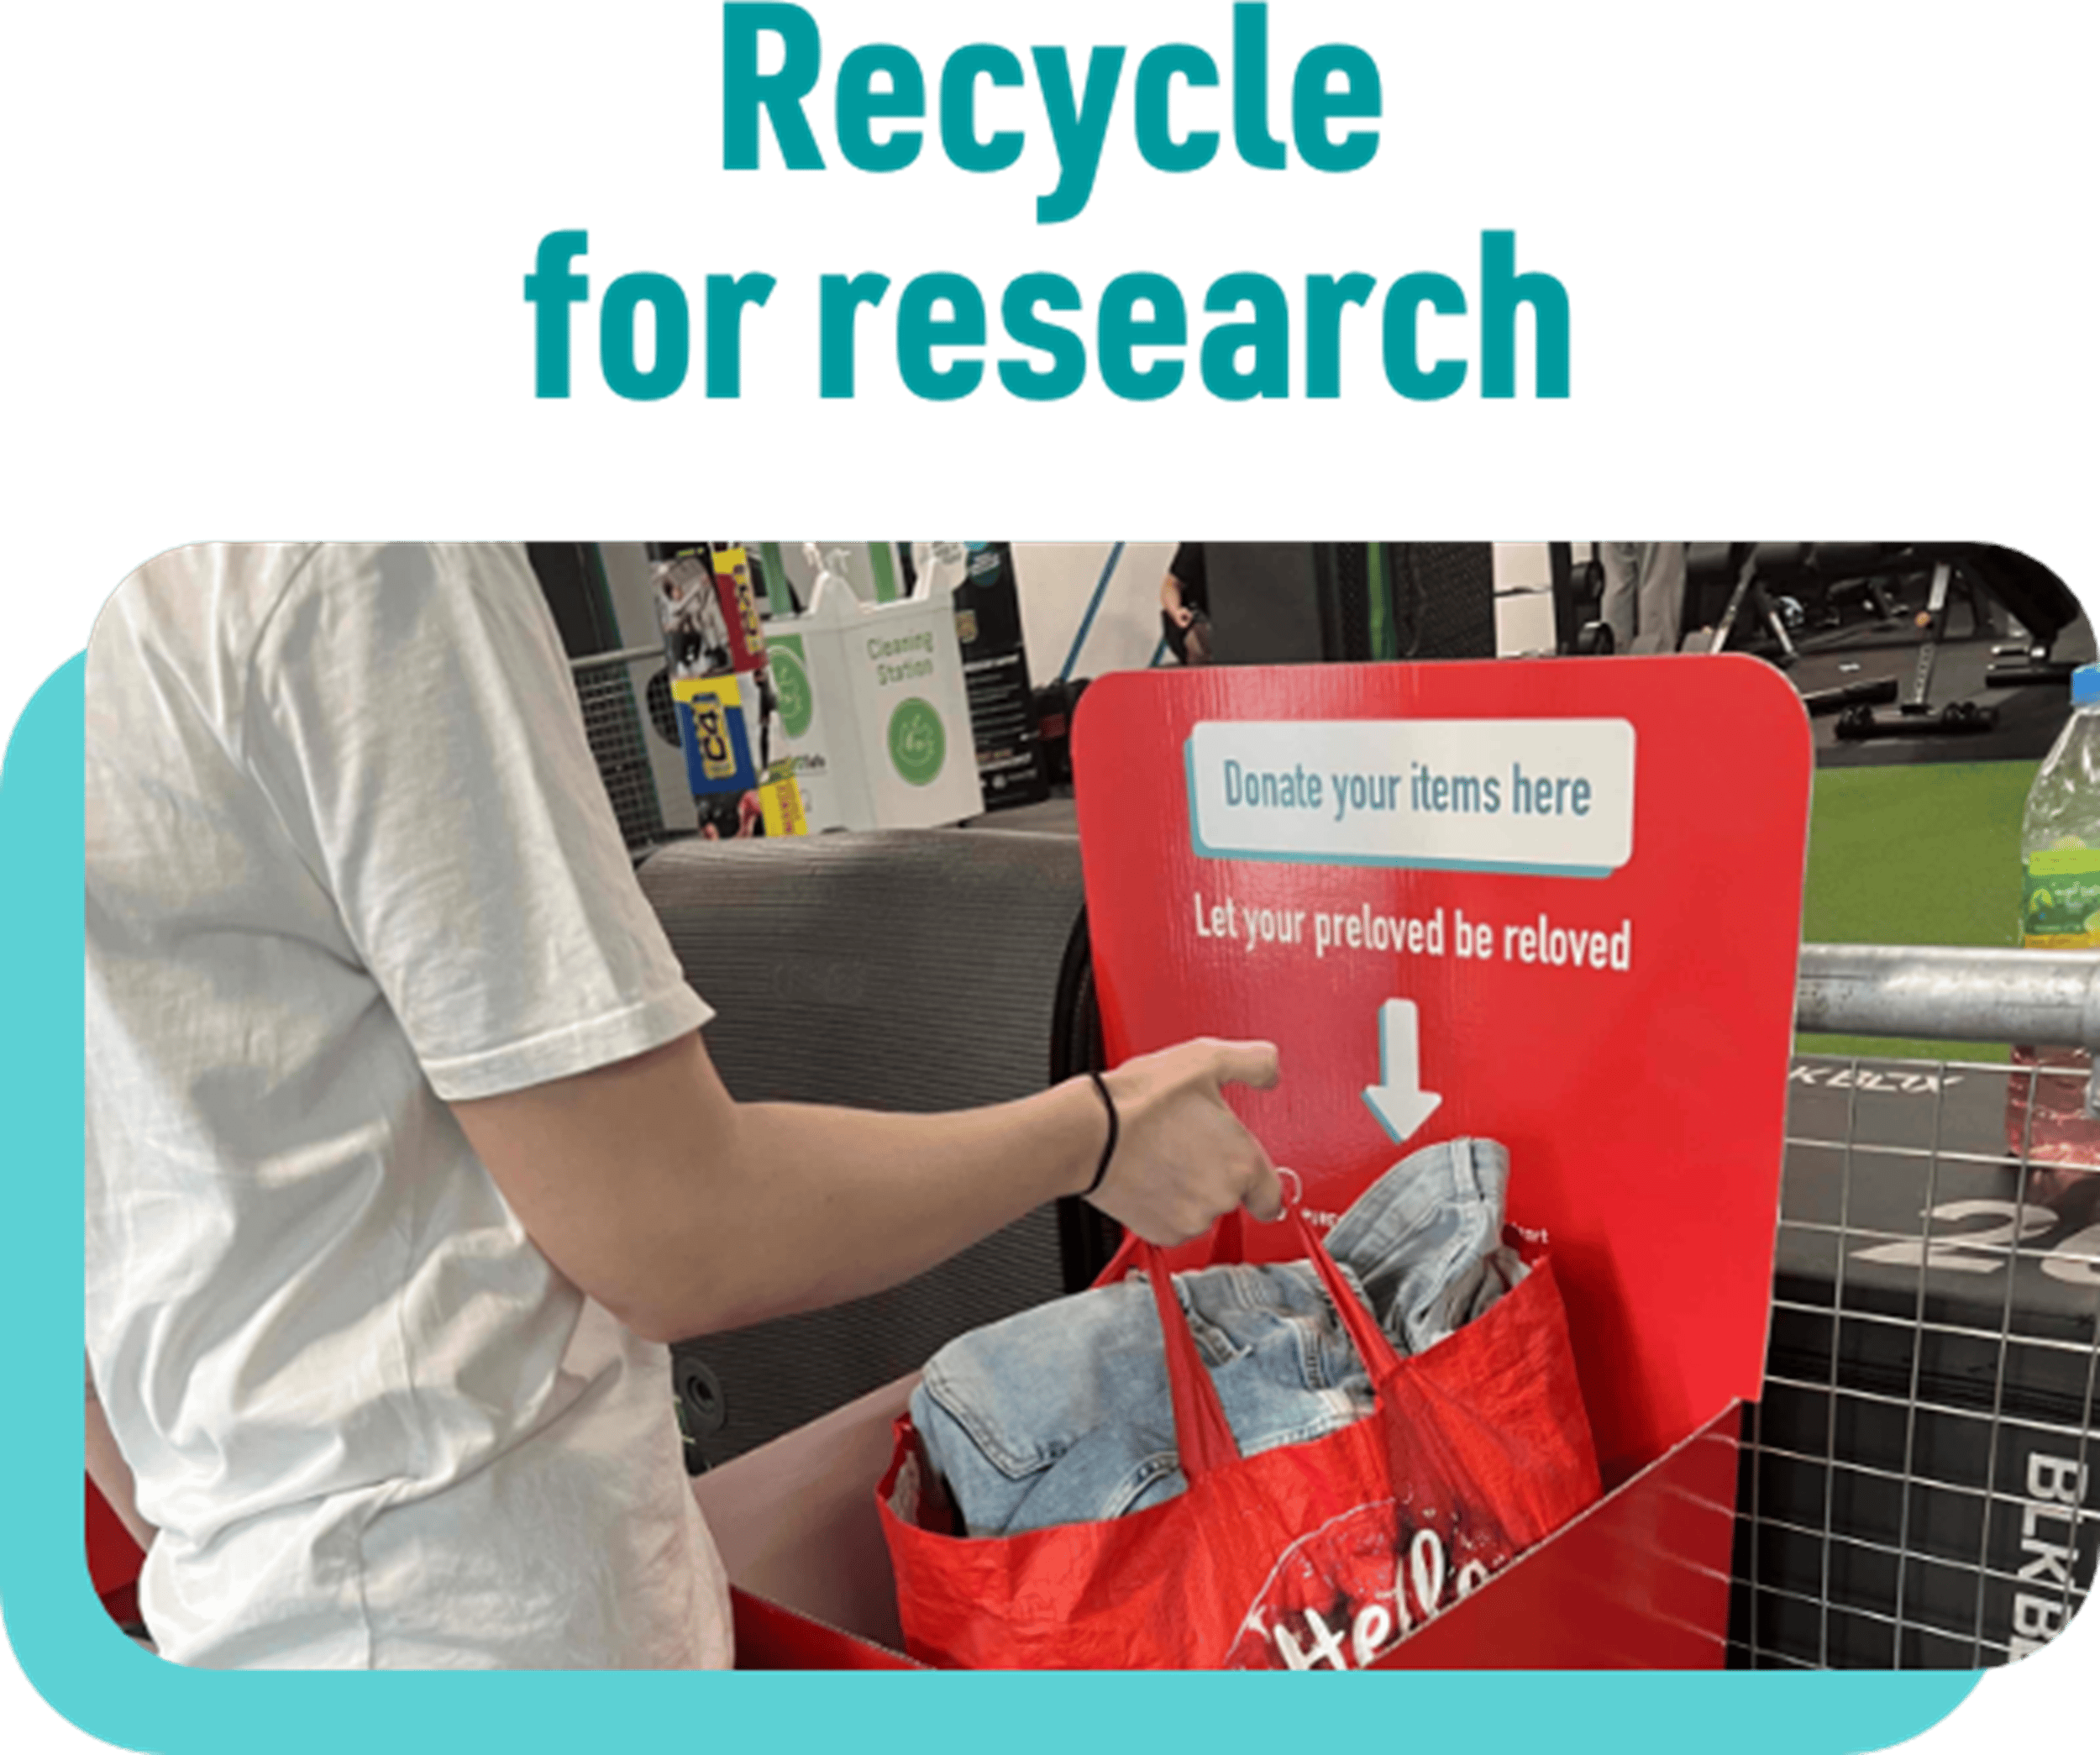 Recycle for research